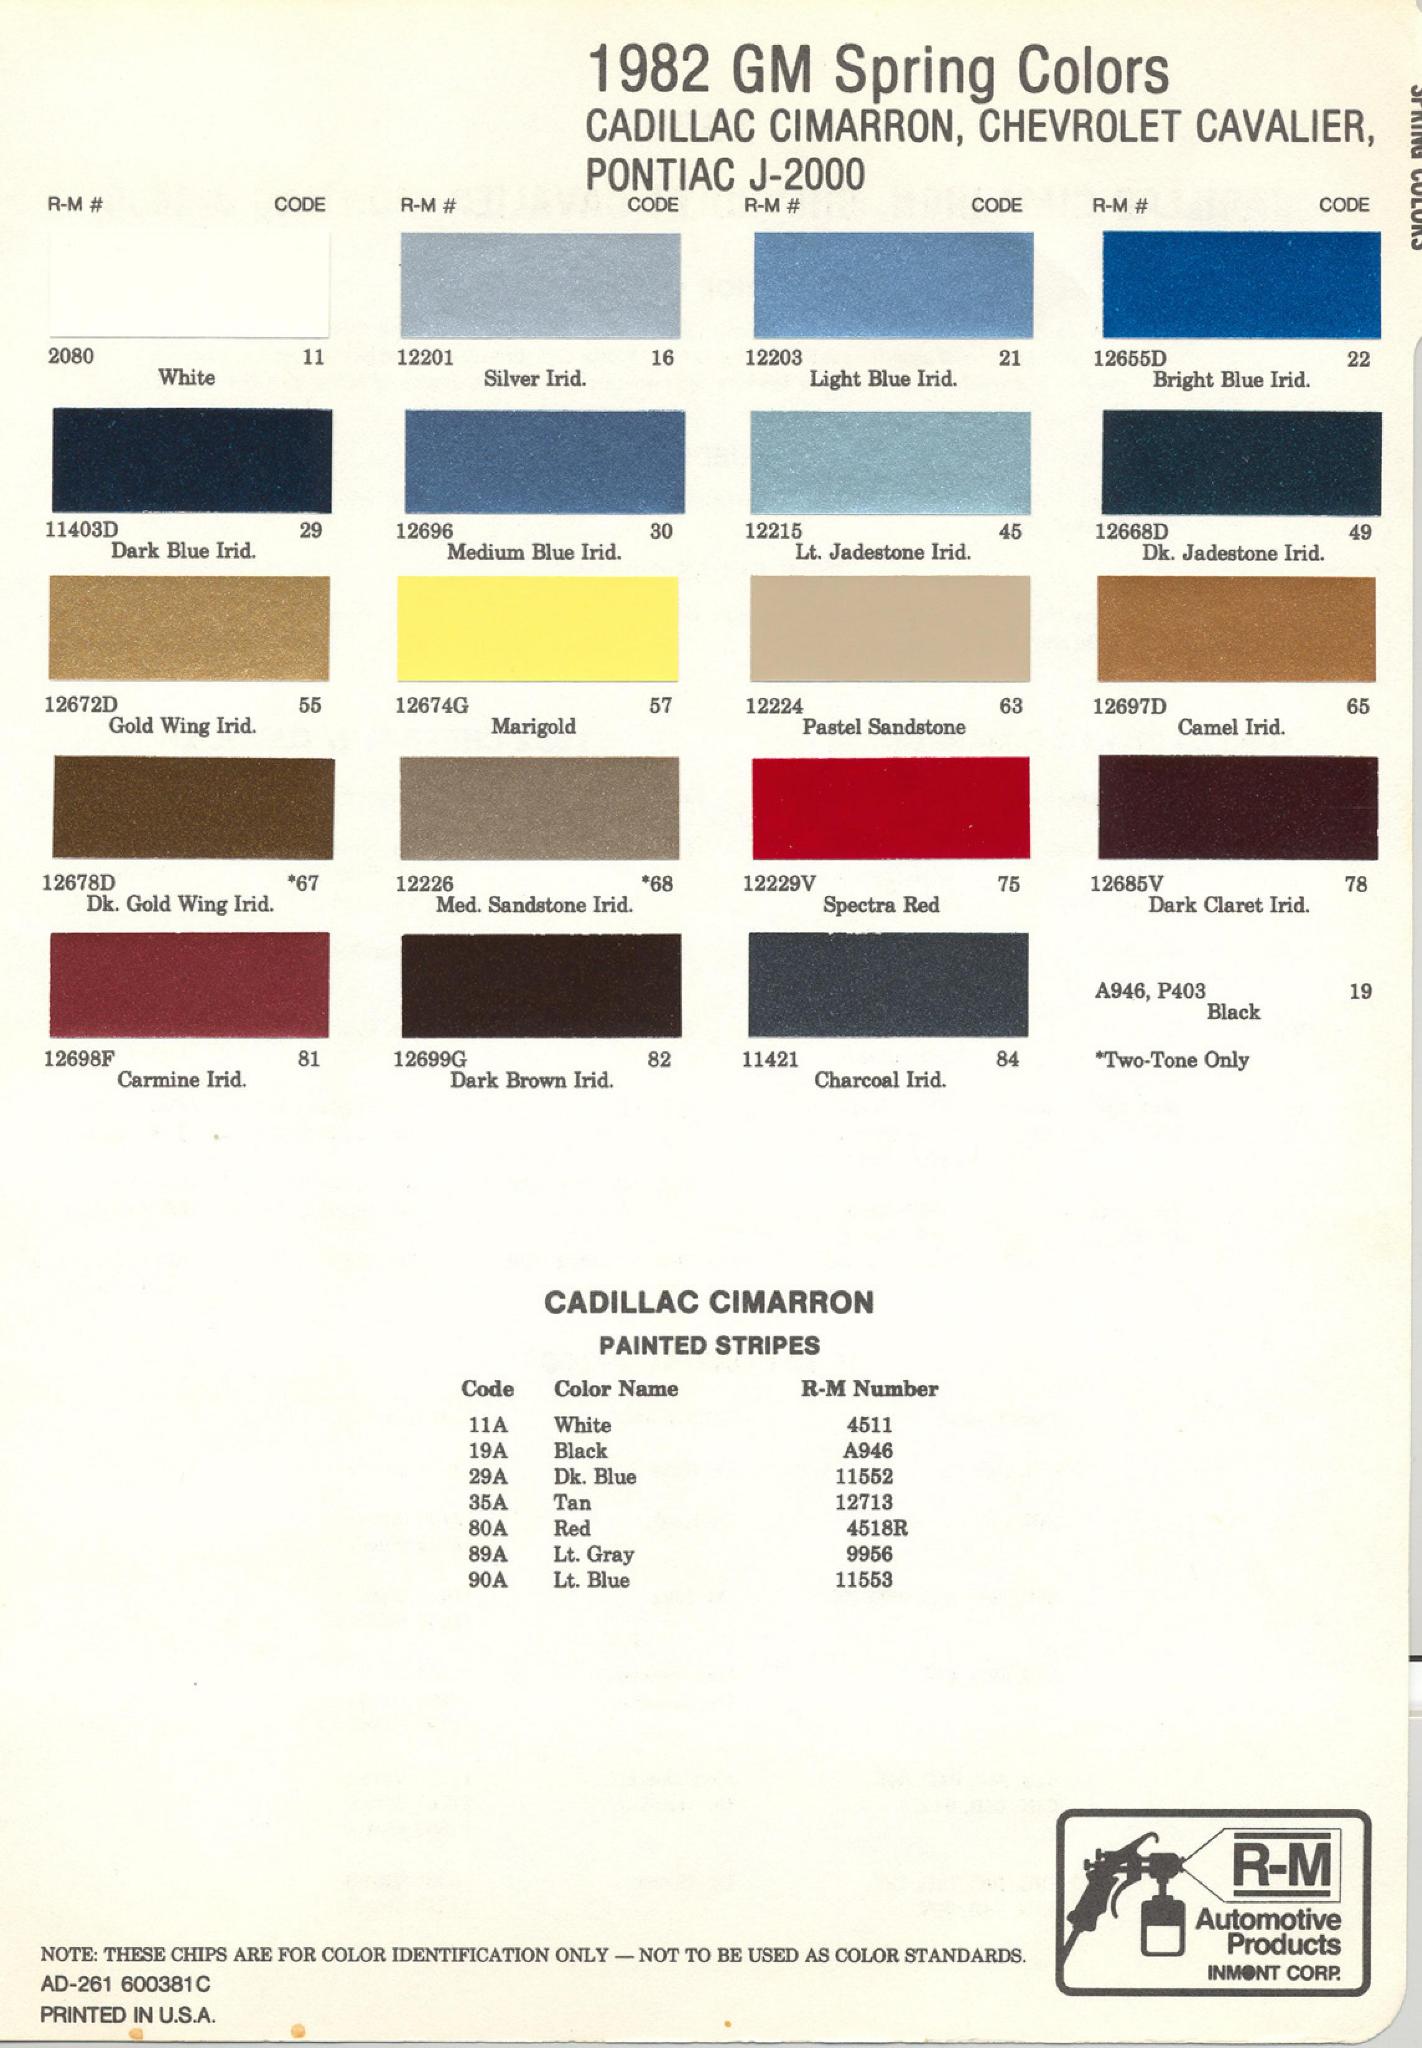 Exterior Colors and Codes used on Cimarron, Cavalier and j-2000 Vehicles